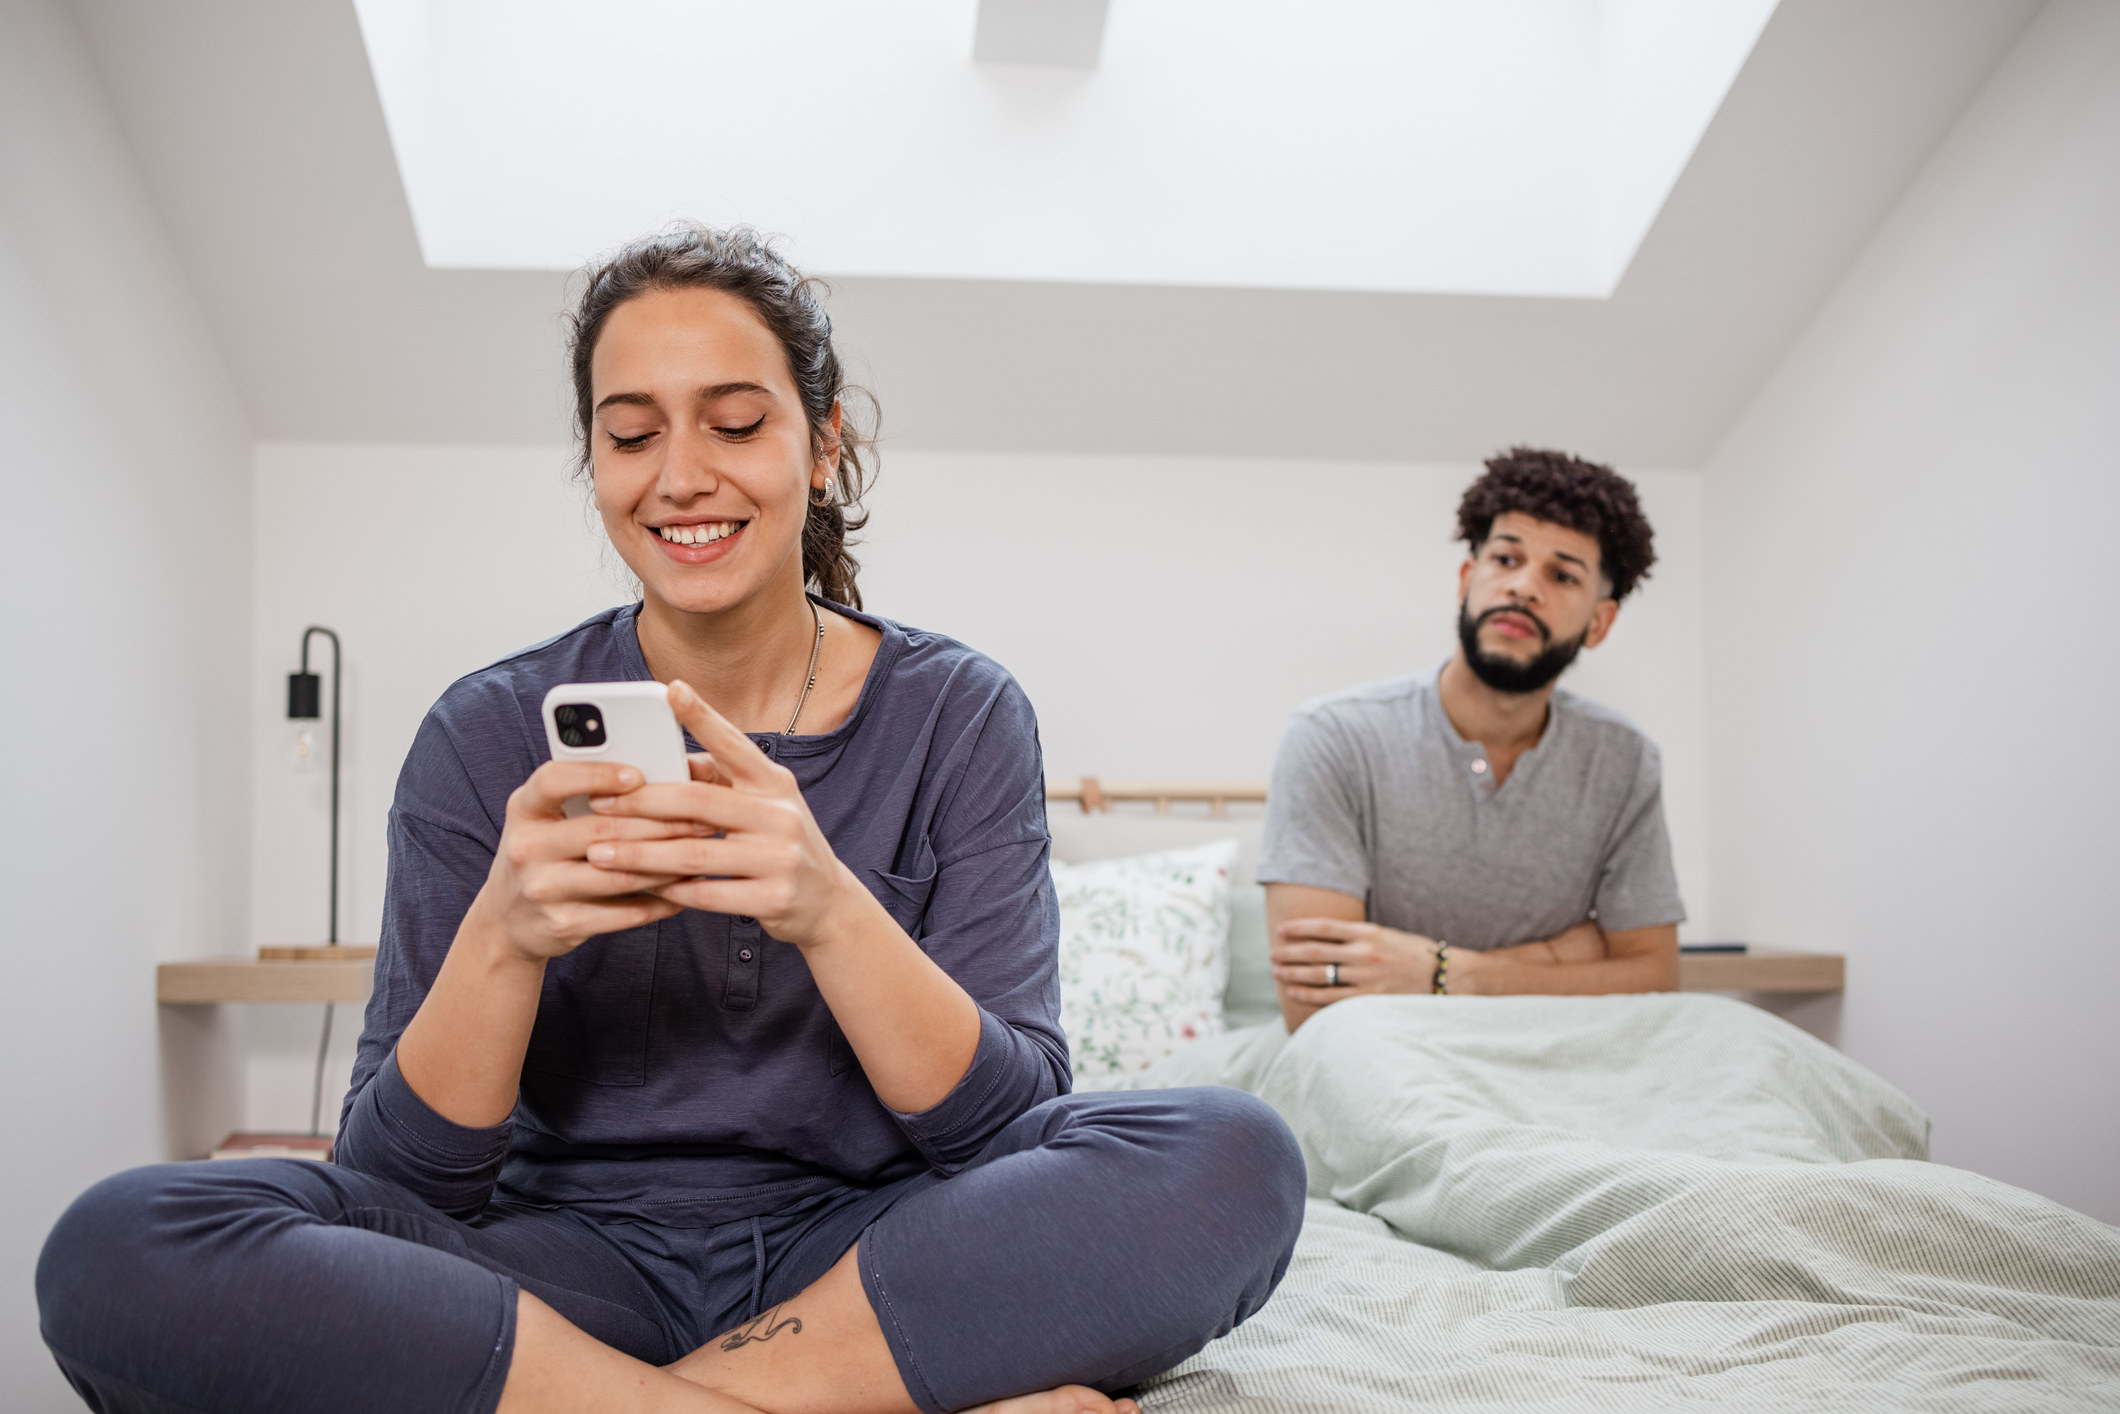 Woman happily texting someone while in bed with a man